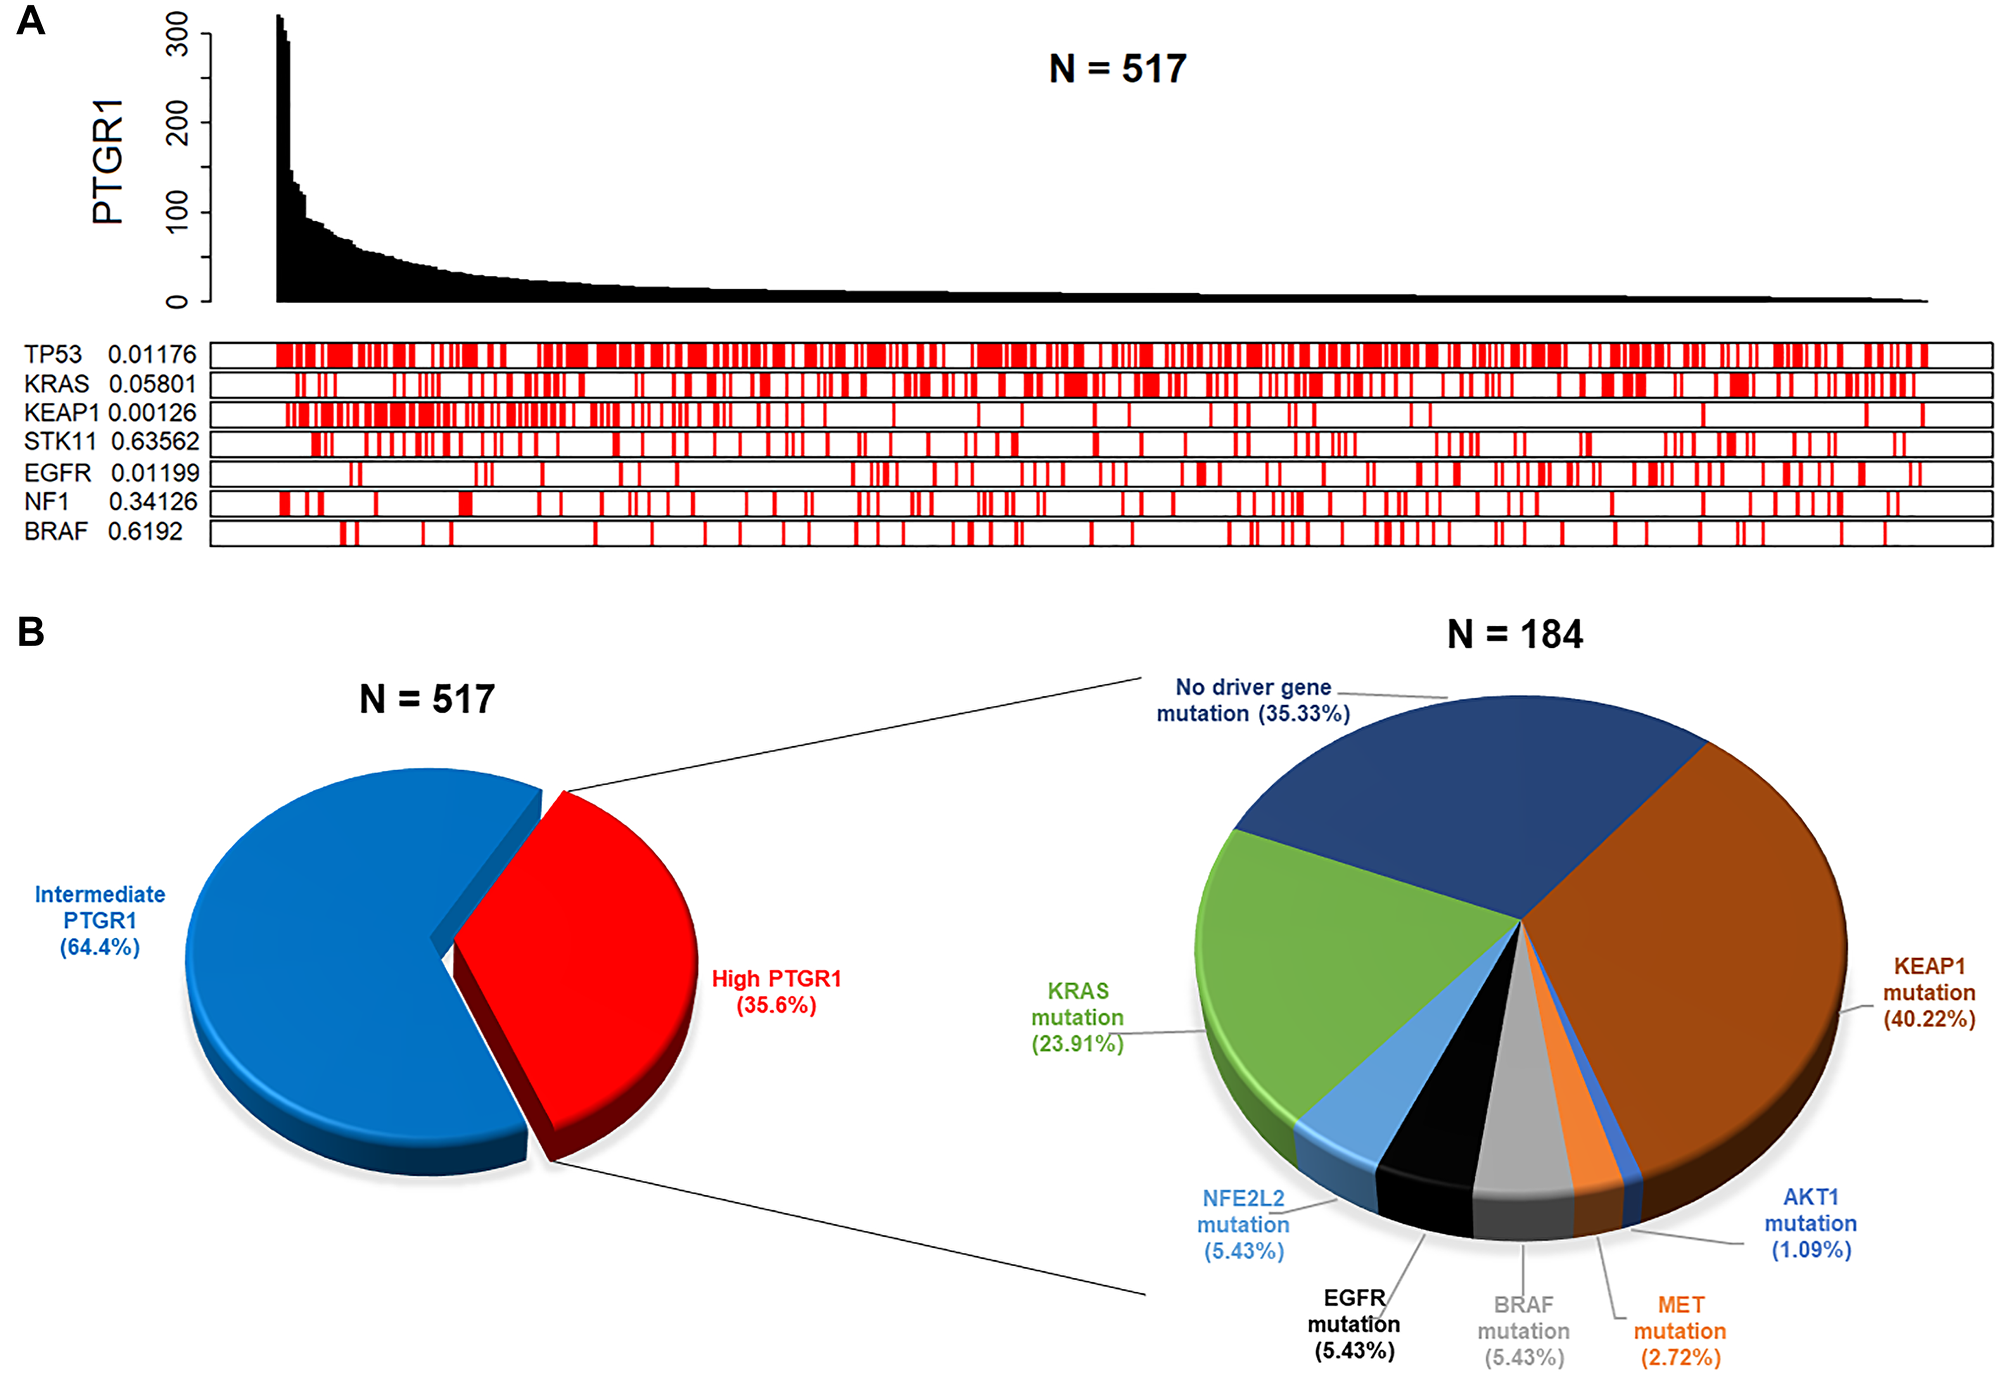 Figure 6: Clinical data analyses from TCGA reveal distinct patient subgroups with elevated PTGR1 that are likely to be predicted responders to LP-184.